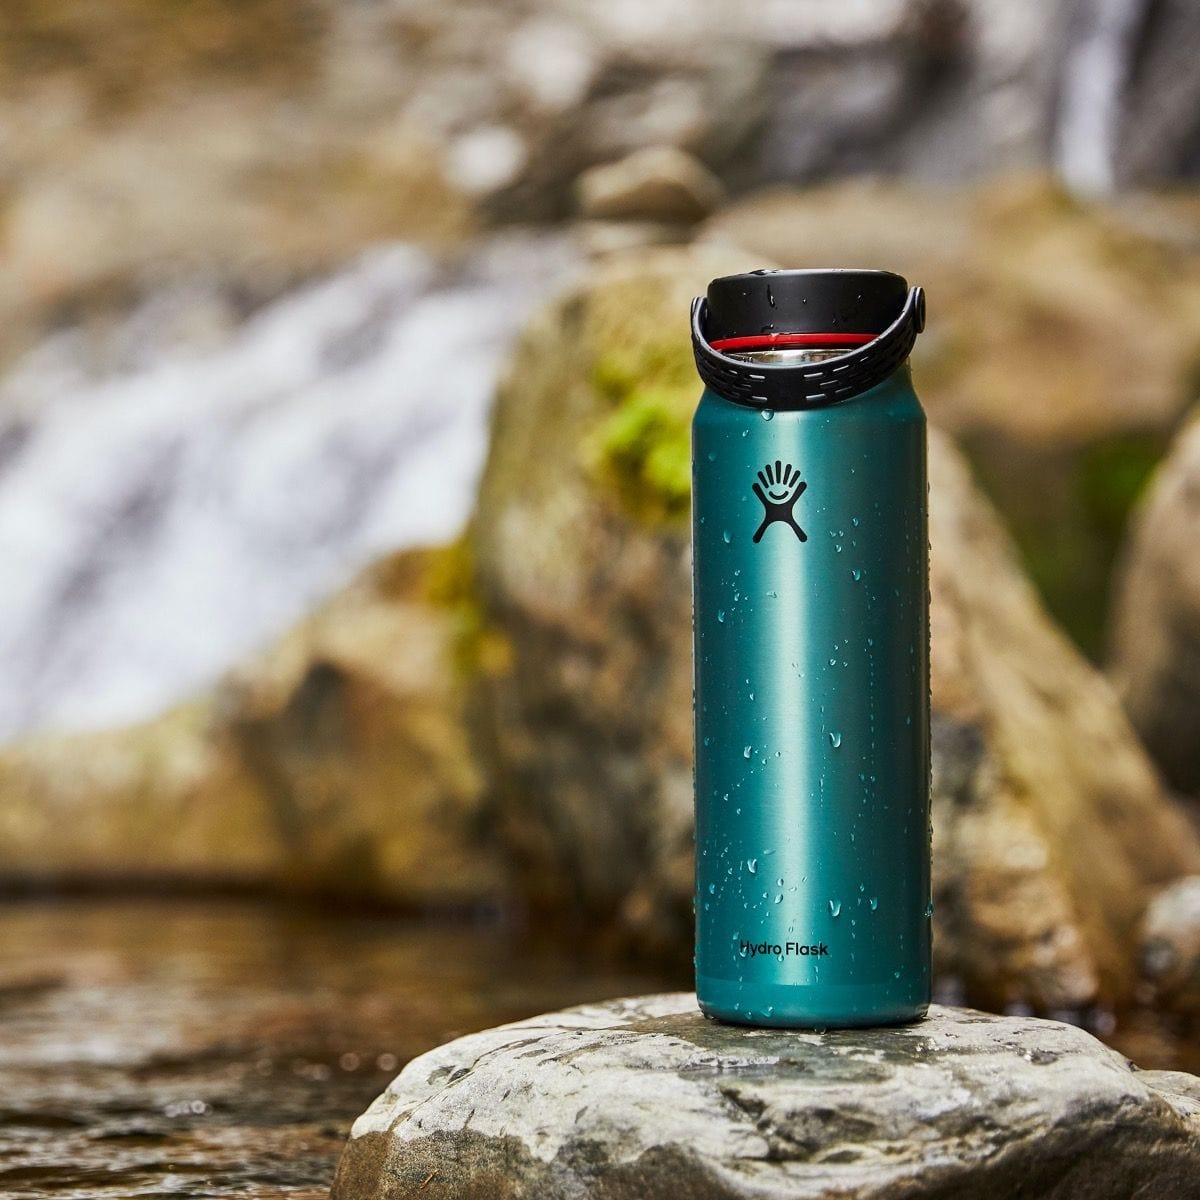 Hydro Flask Oasis Review - 1 Gallon Water Jug Is Nearly Indestructible